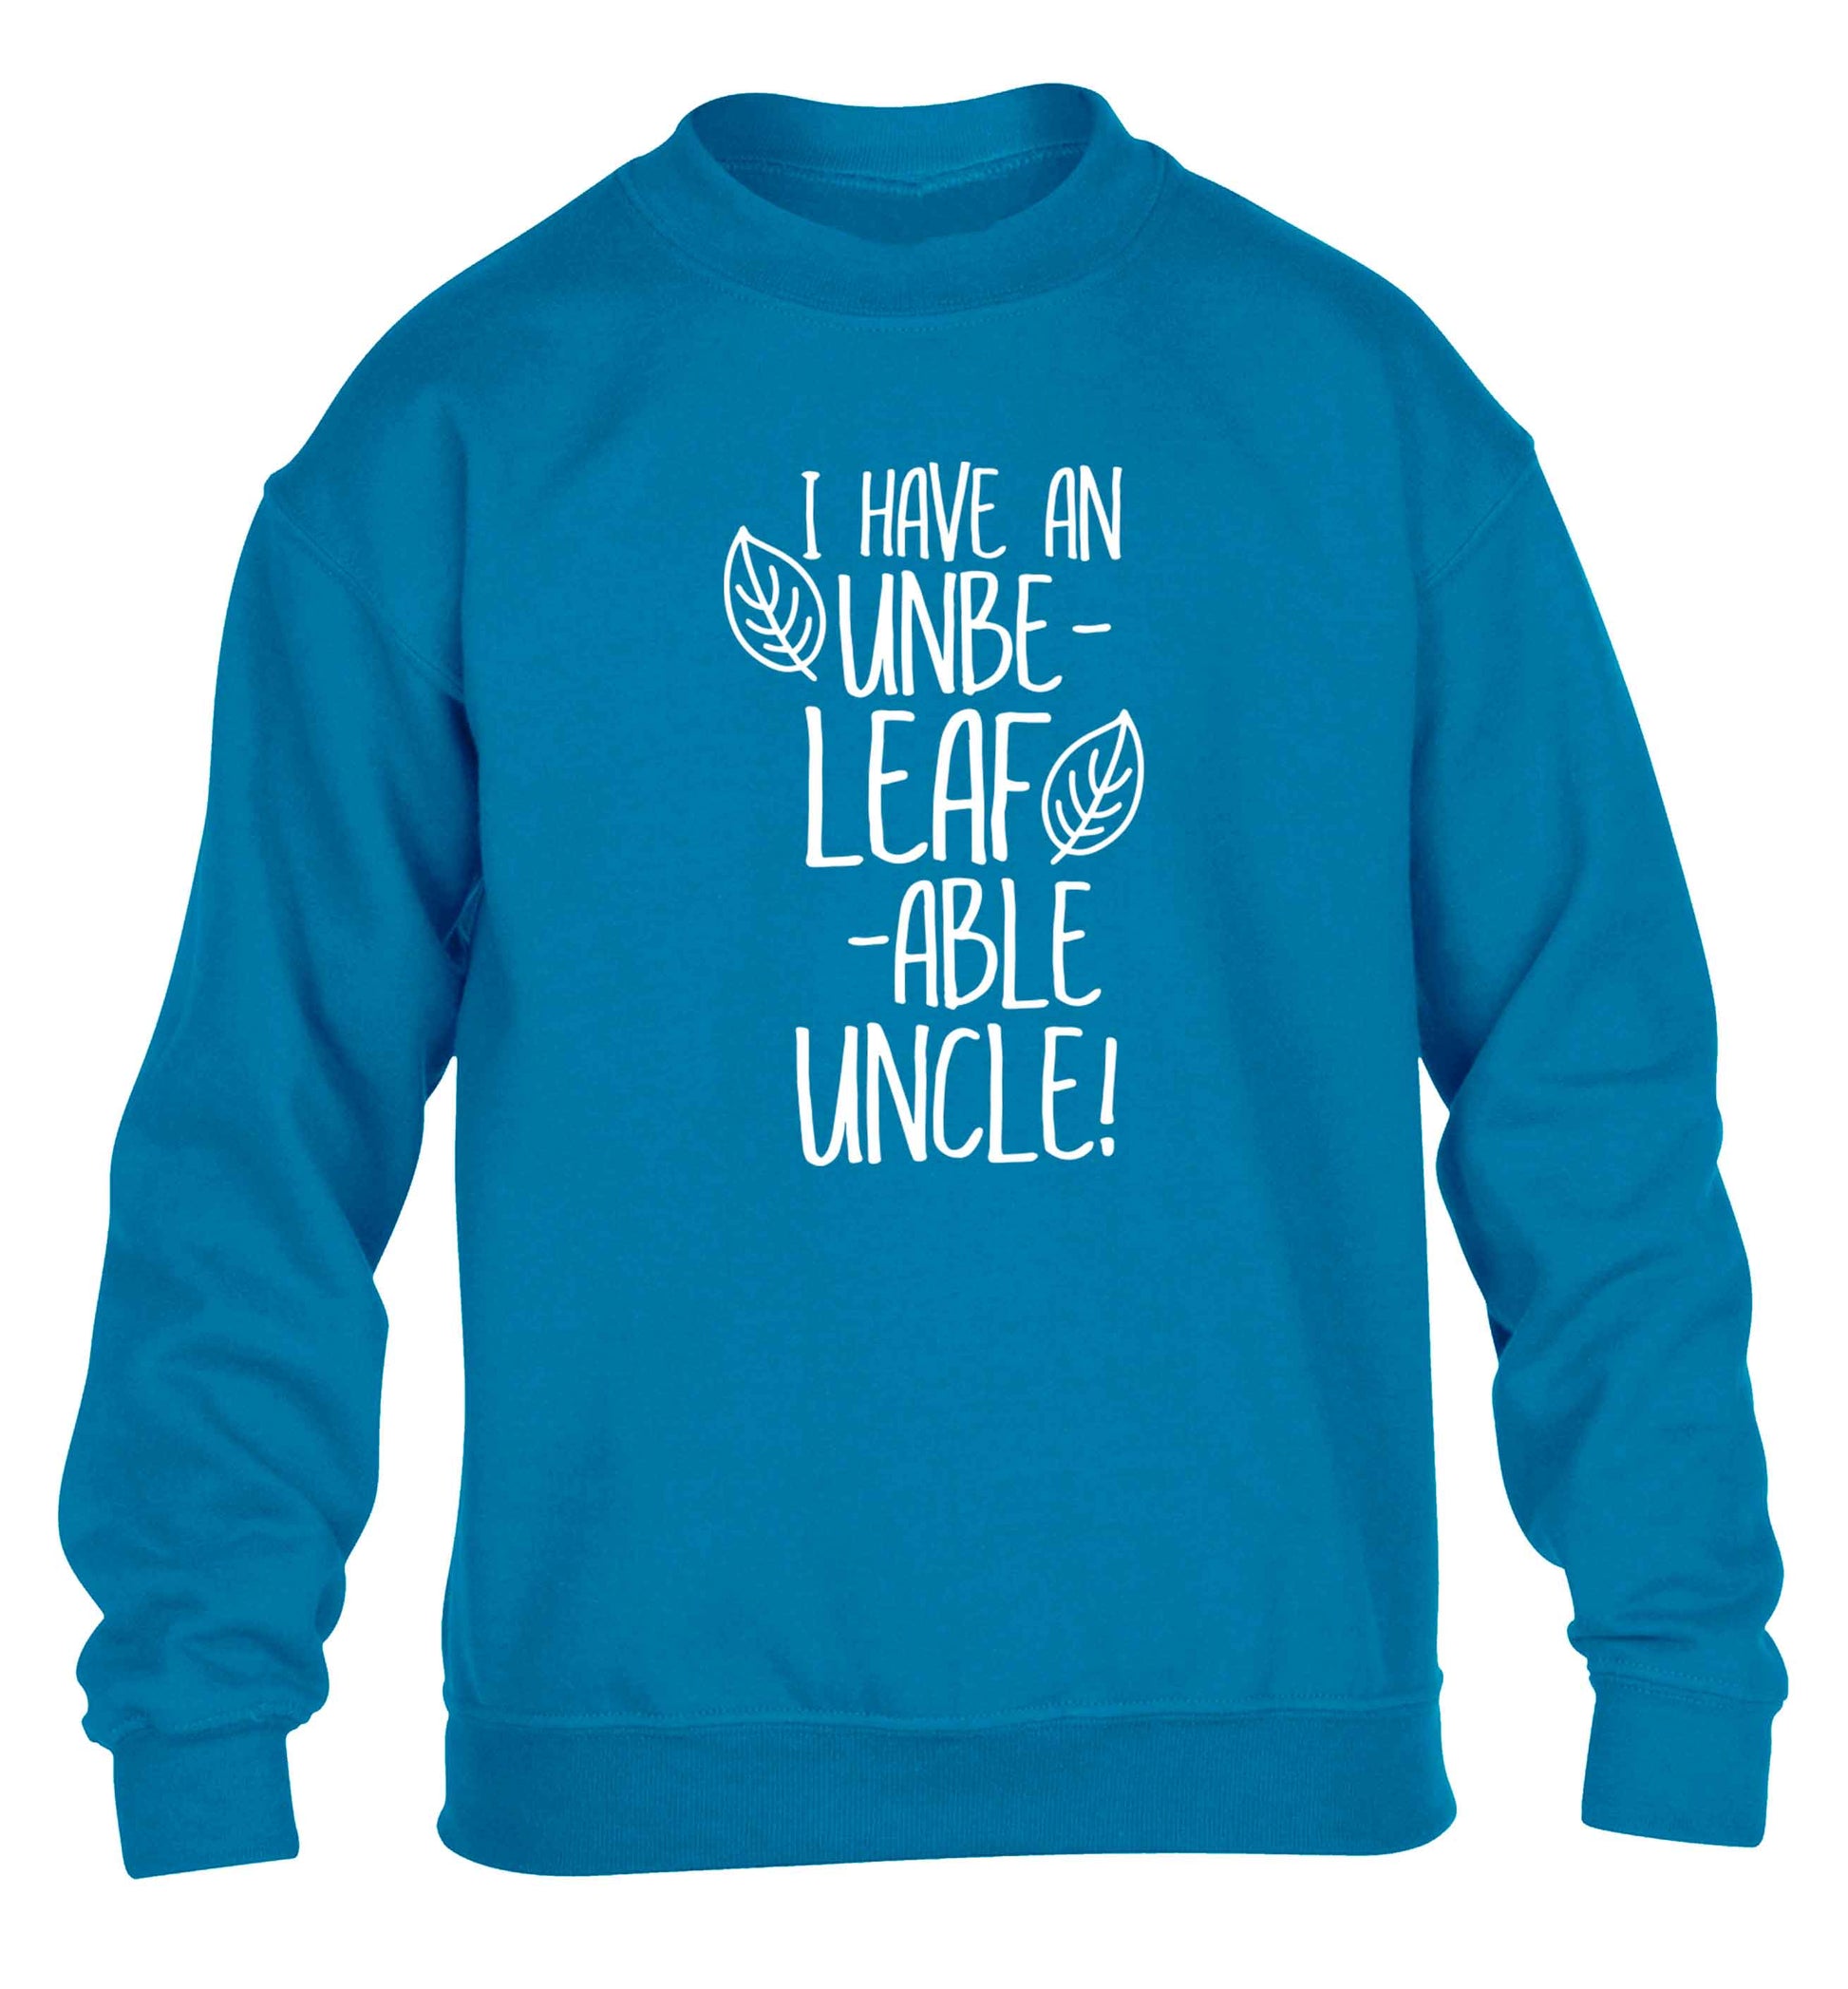 I have an unbe-leaf-able uncle children's blue sweater 12-13 Years